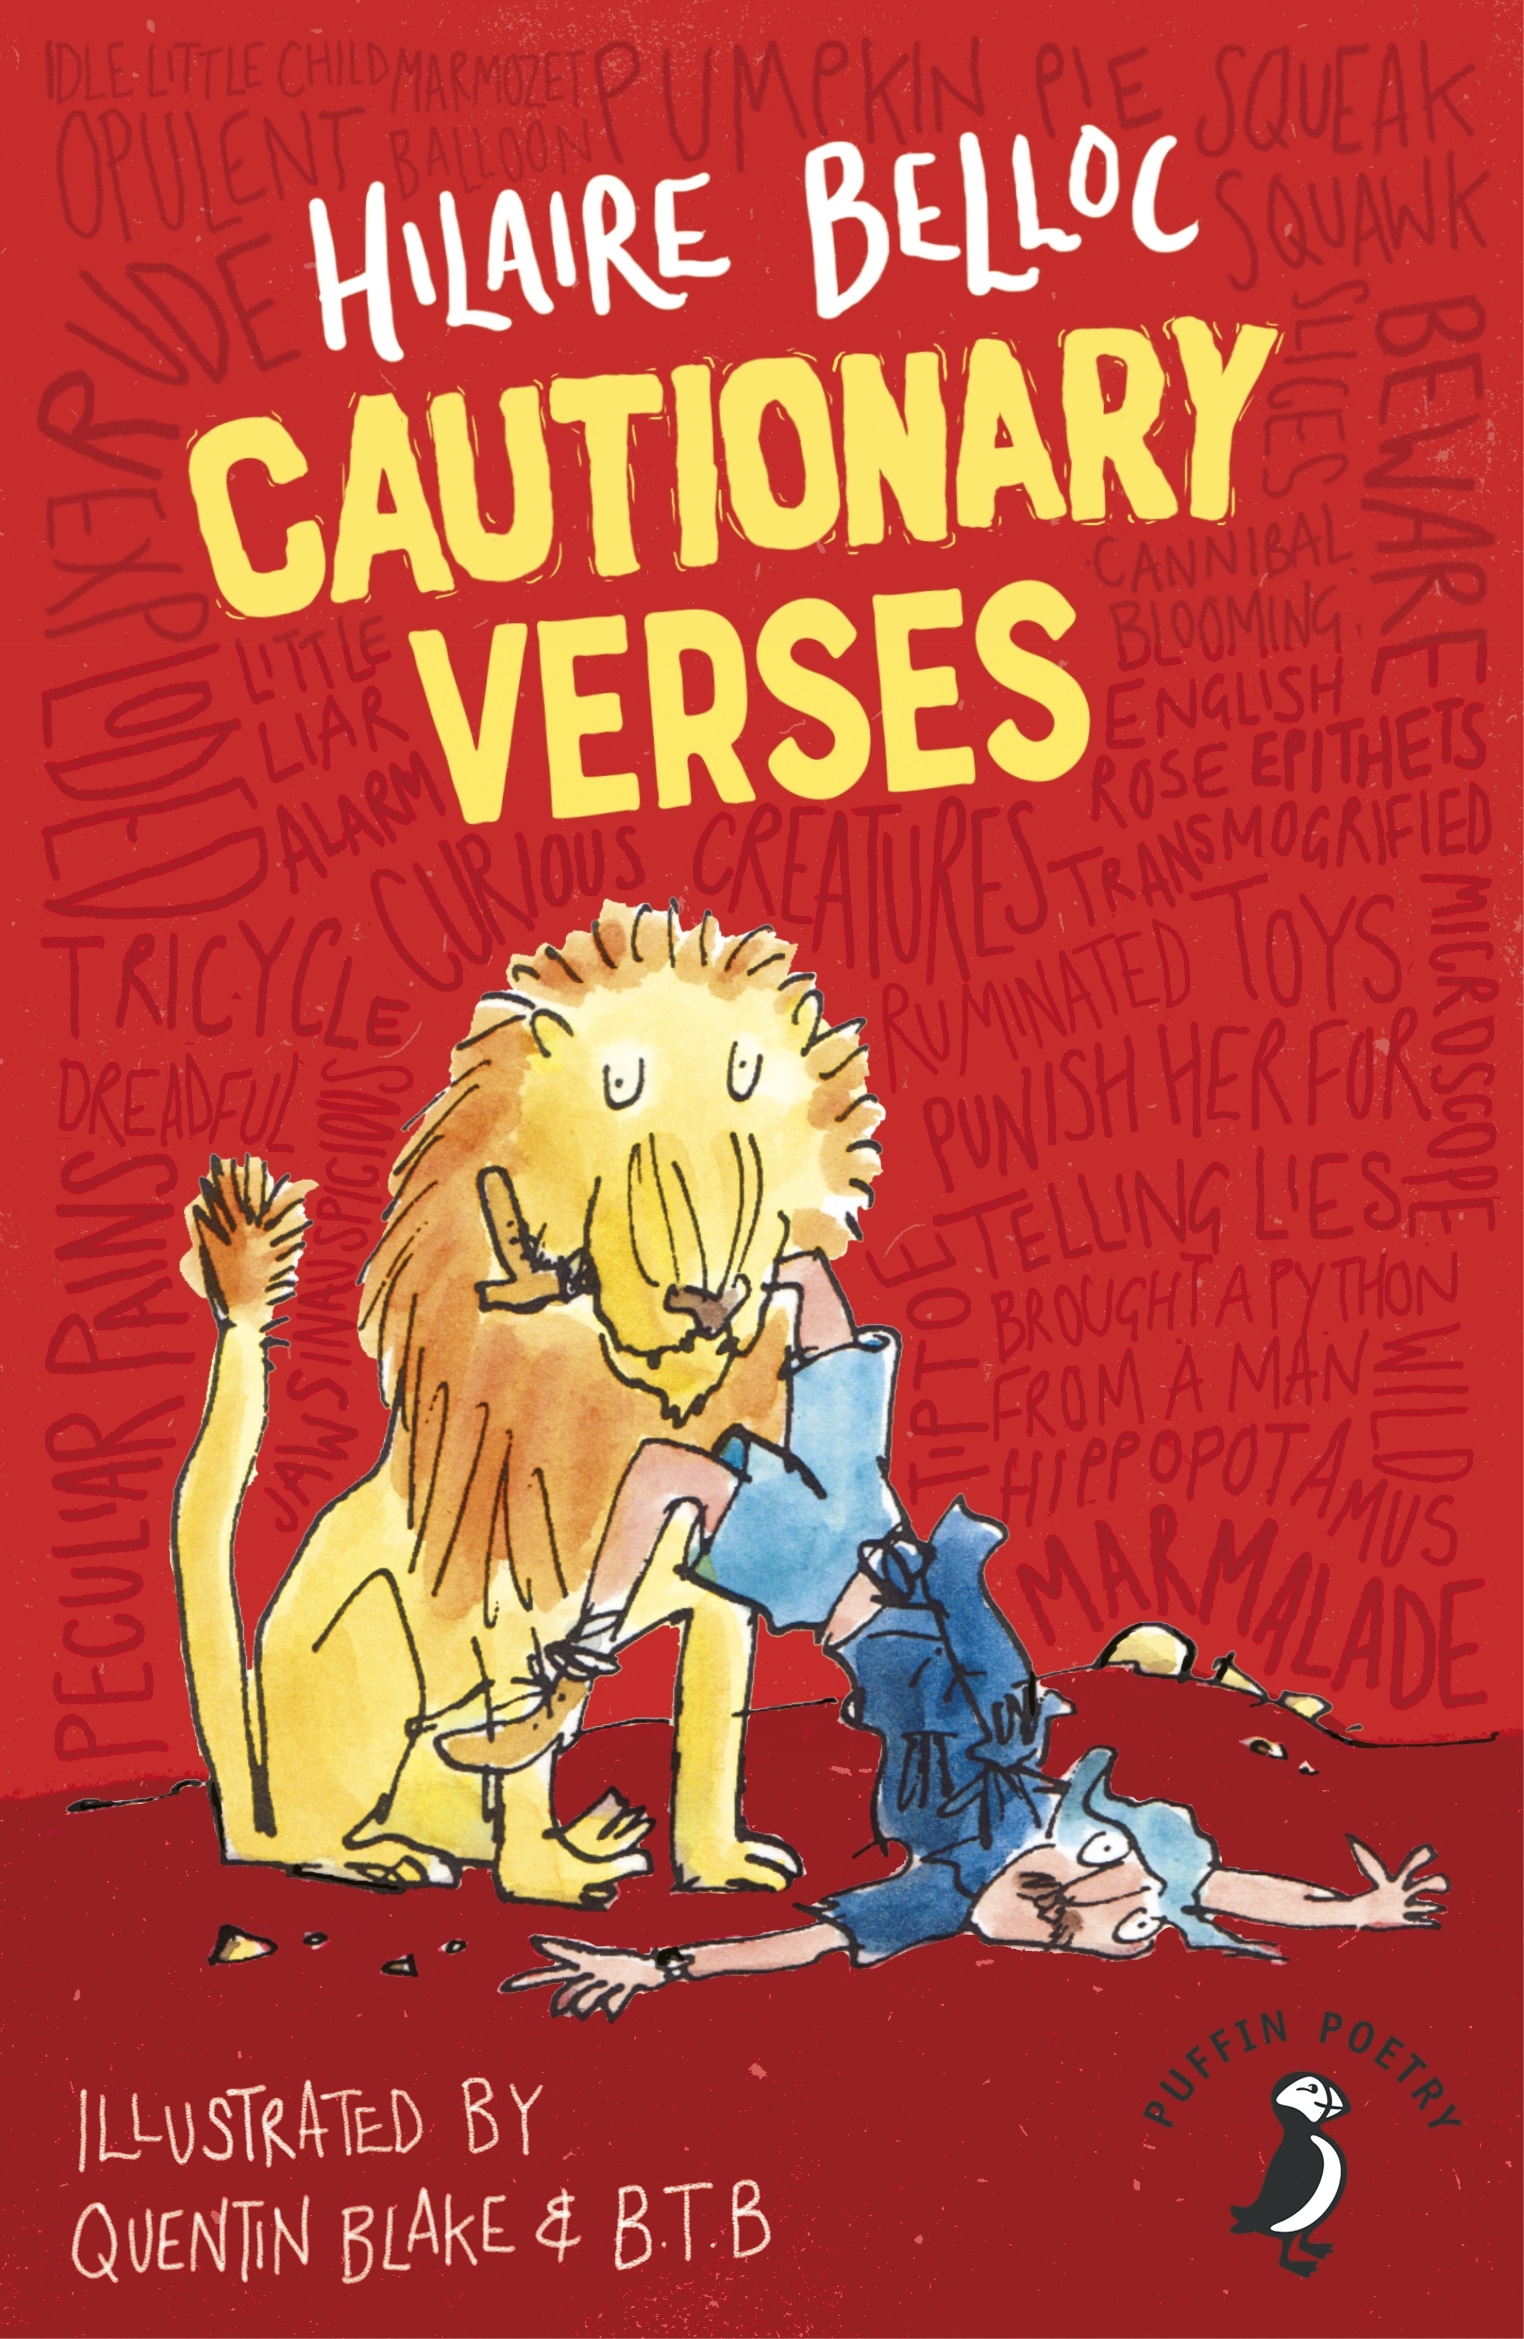 Book “Cautionary Verses” by Hilaire Belloc — October 3, 2019